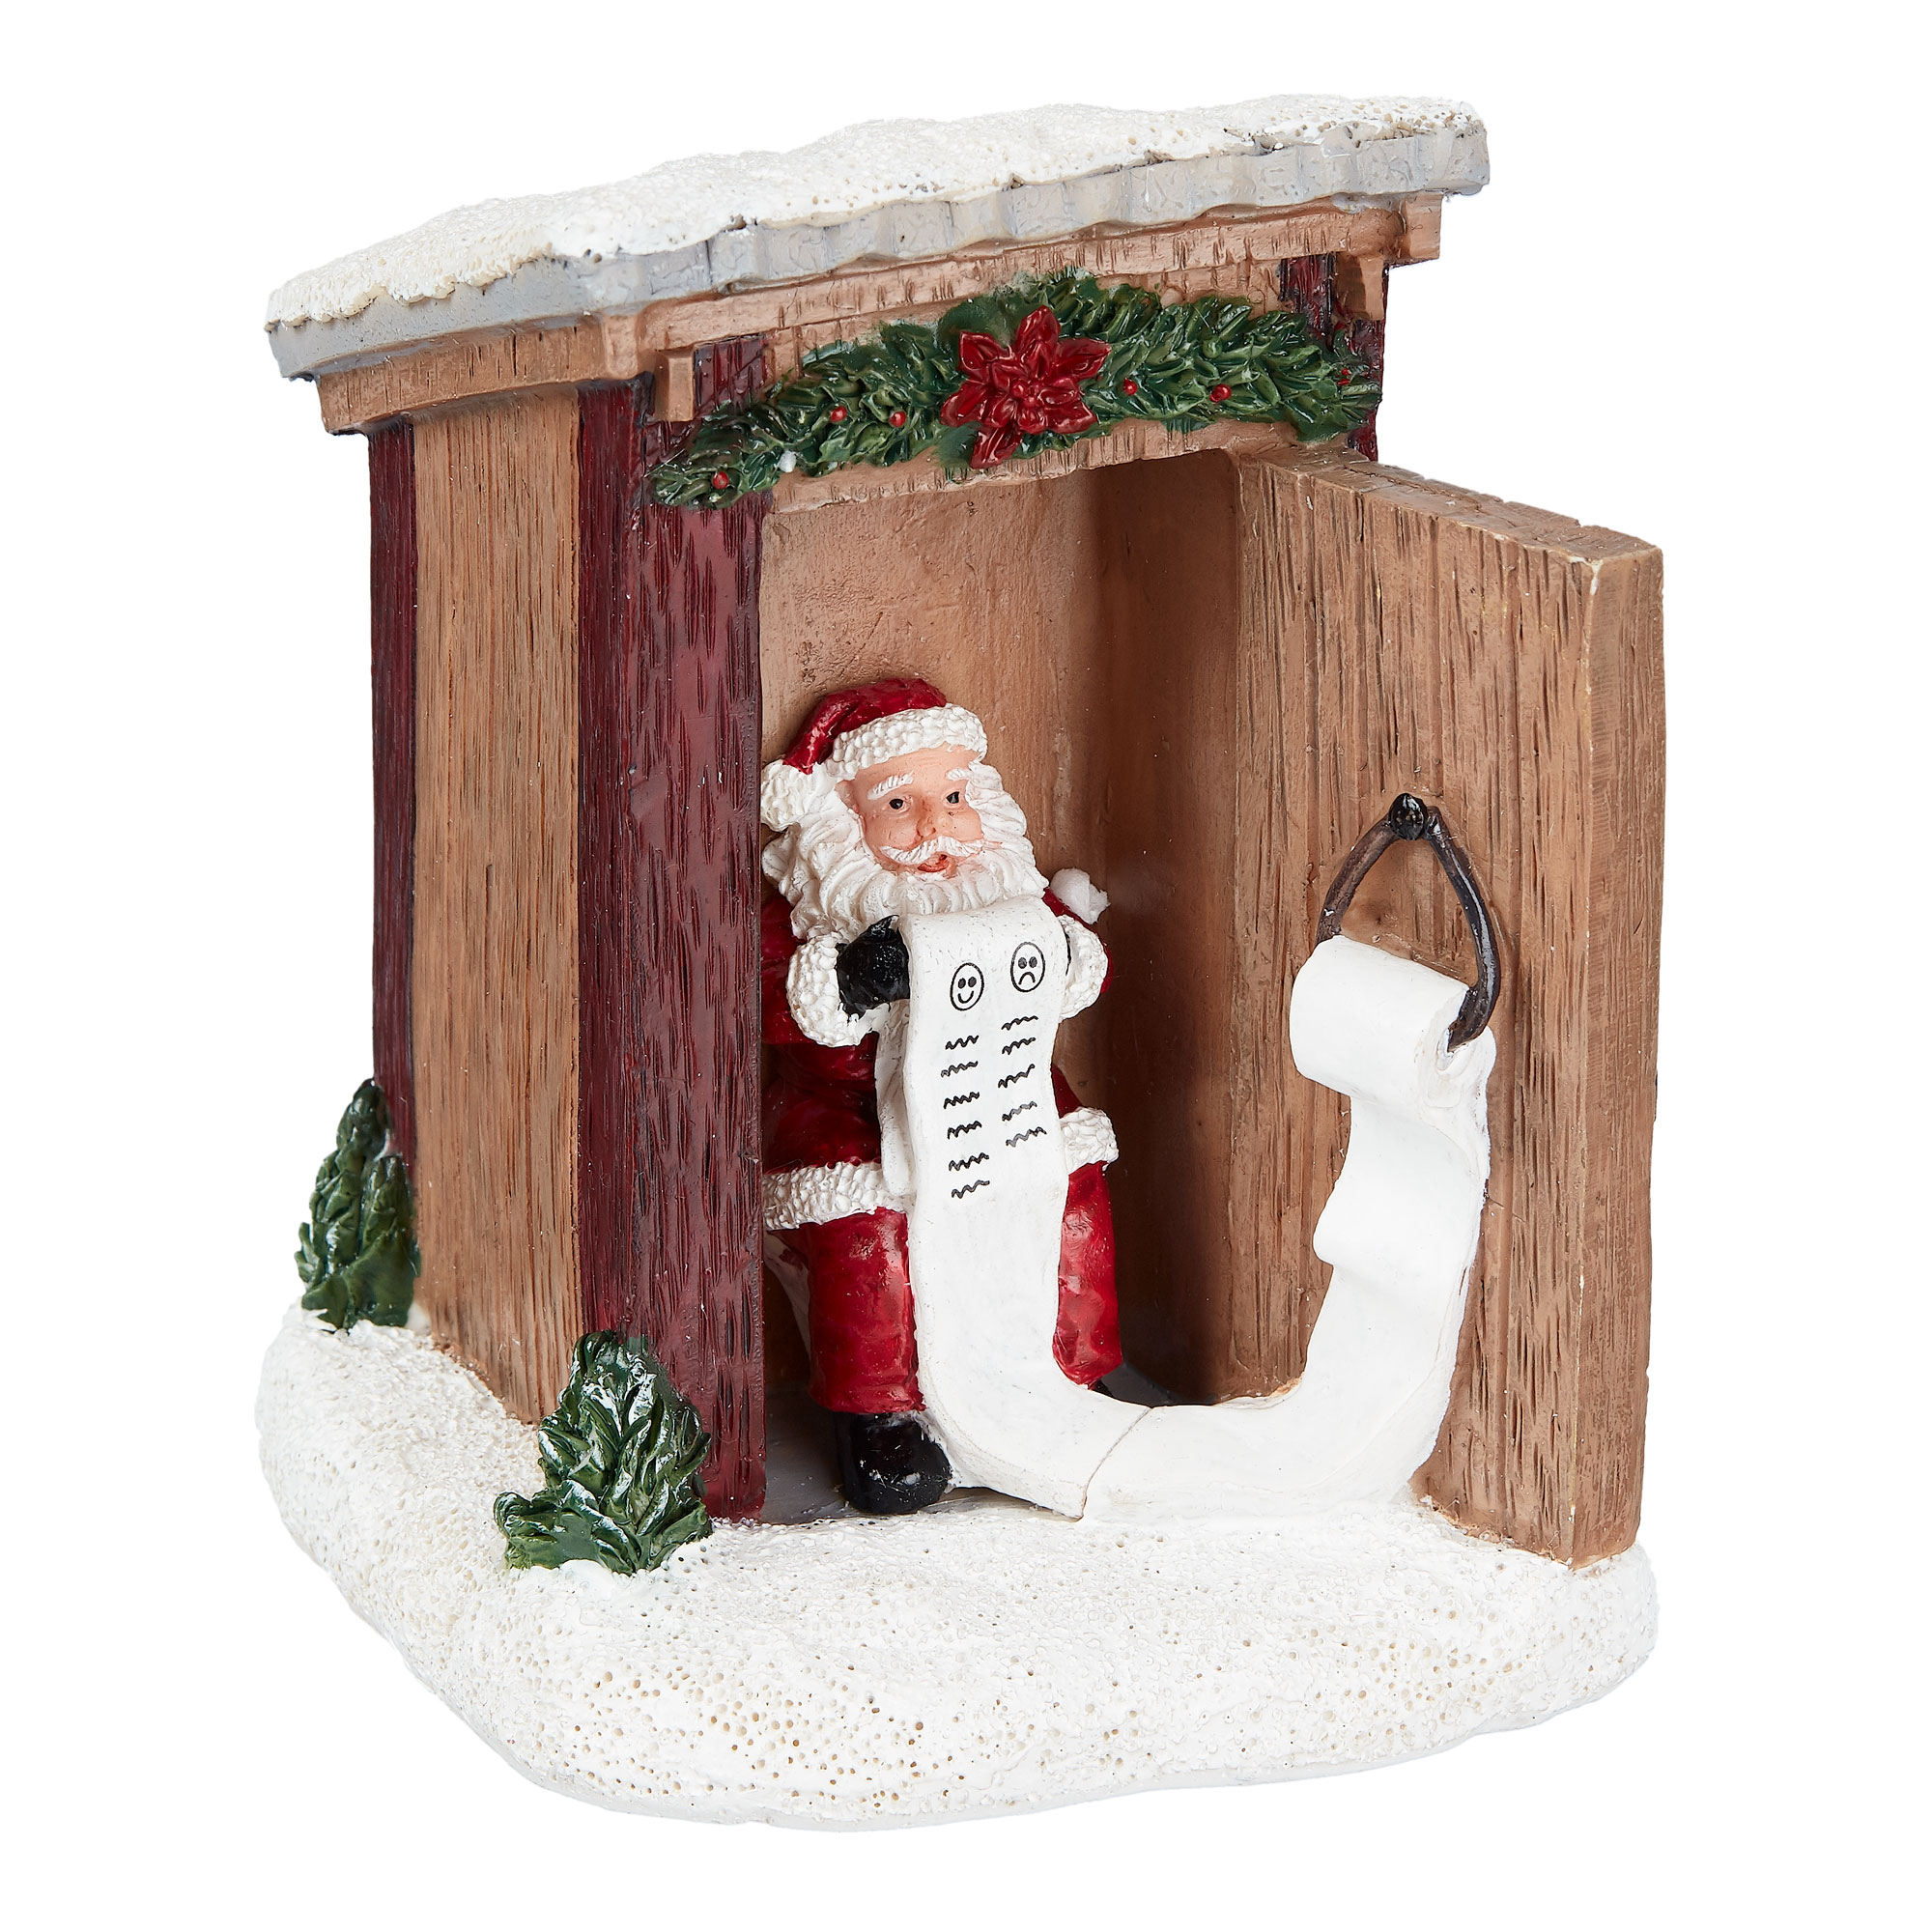 Holiday Time Santa in Outhouse Christmas Village Collectible Figurine Table Top Decoration - image 1 of 5